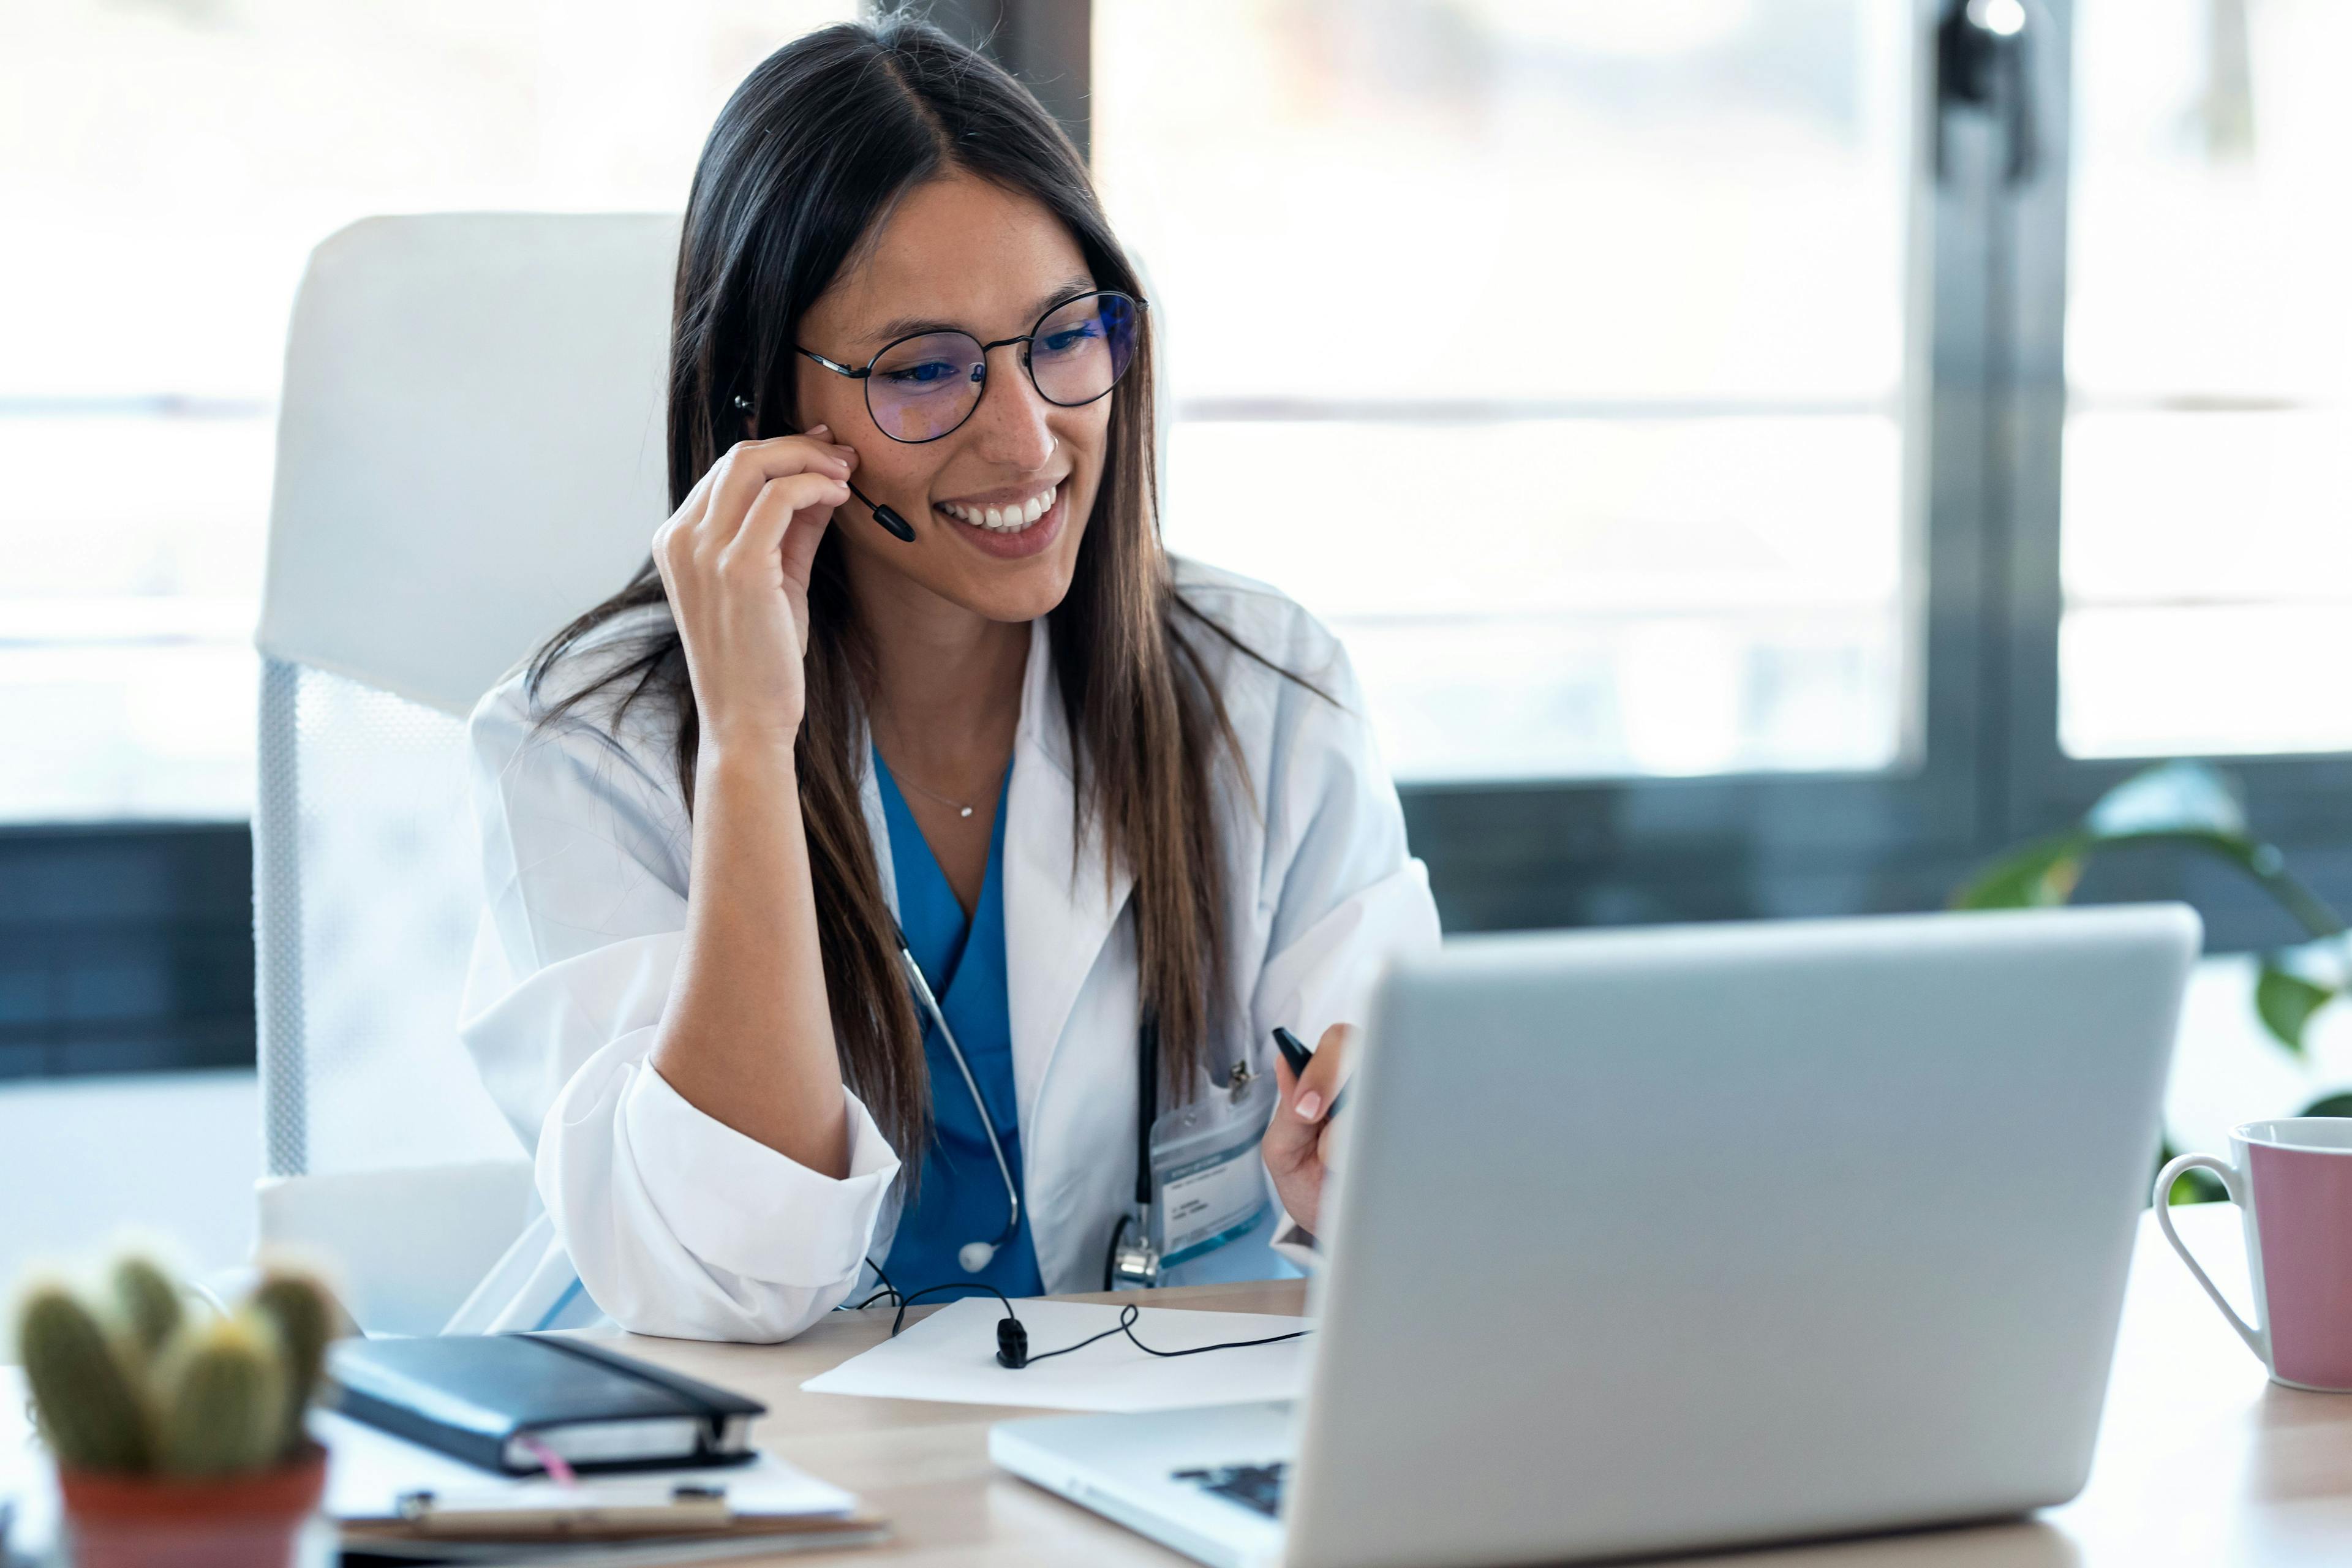 Telehealth Medication Abortion Services Effective for Diverse Patient Populations